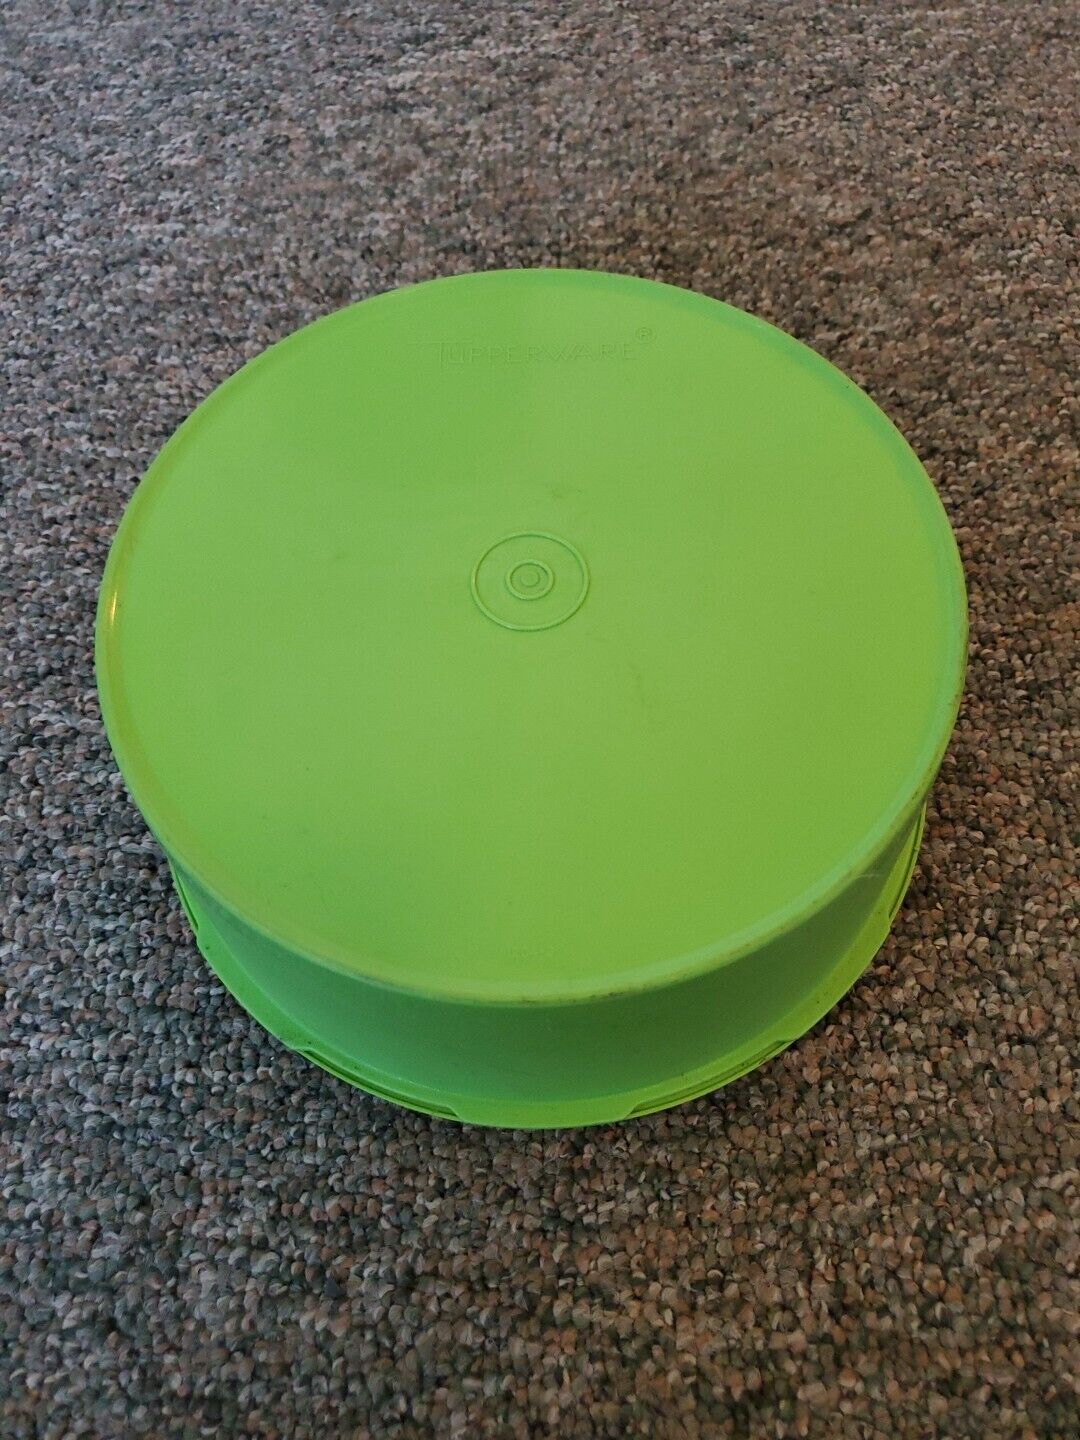 Vintage Tupperware Apple Green Container